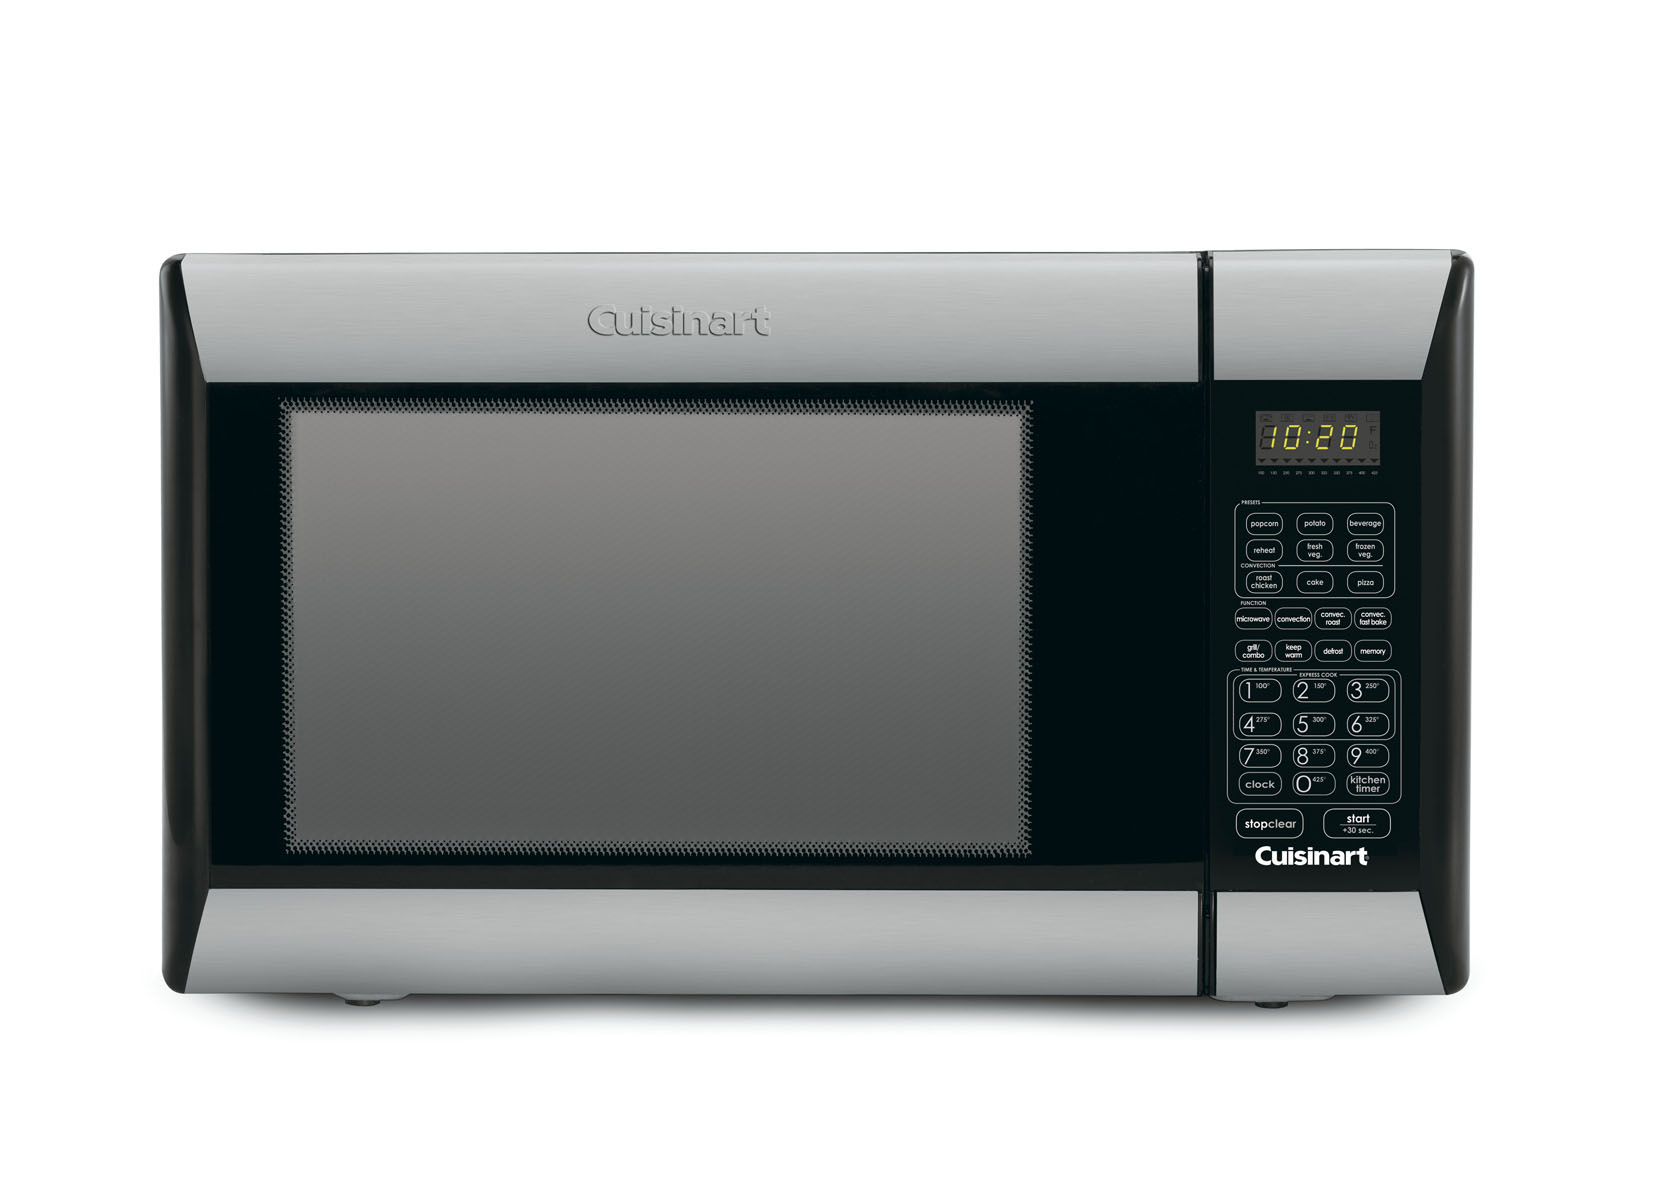 Cuisinart 1.2 Cubic Foot 1000 W Microwave Oven w/ Reversible Grill Rack - image 5 of 5